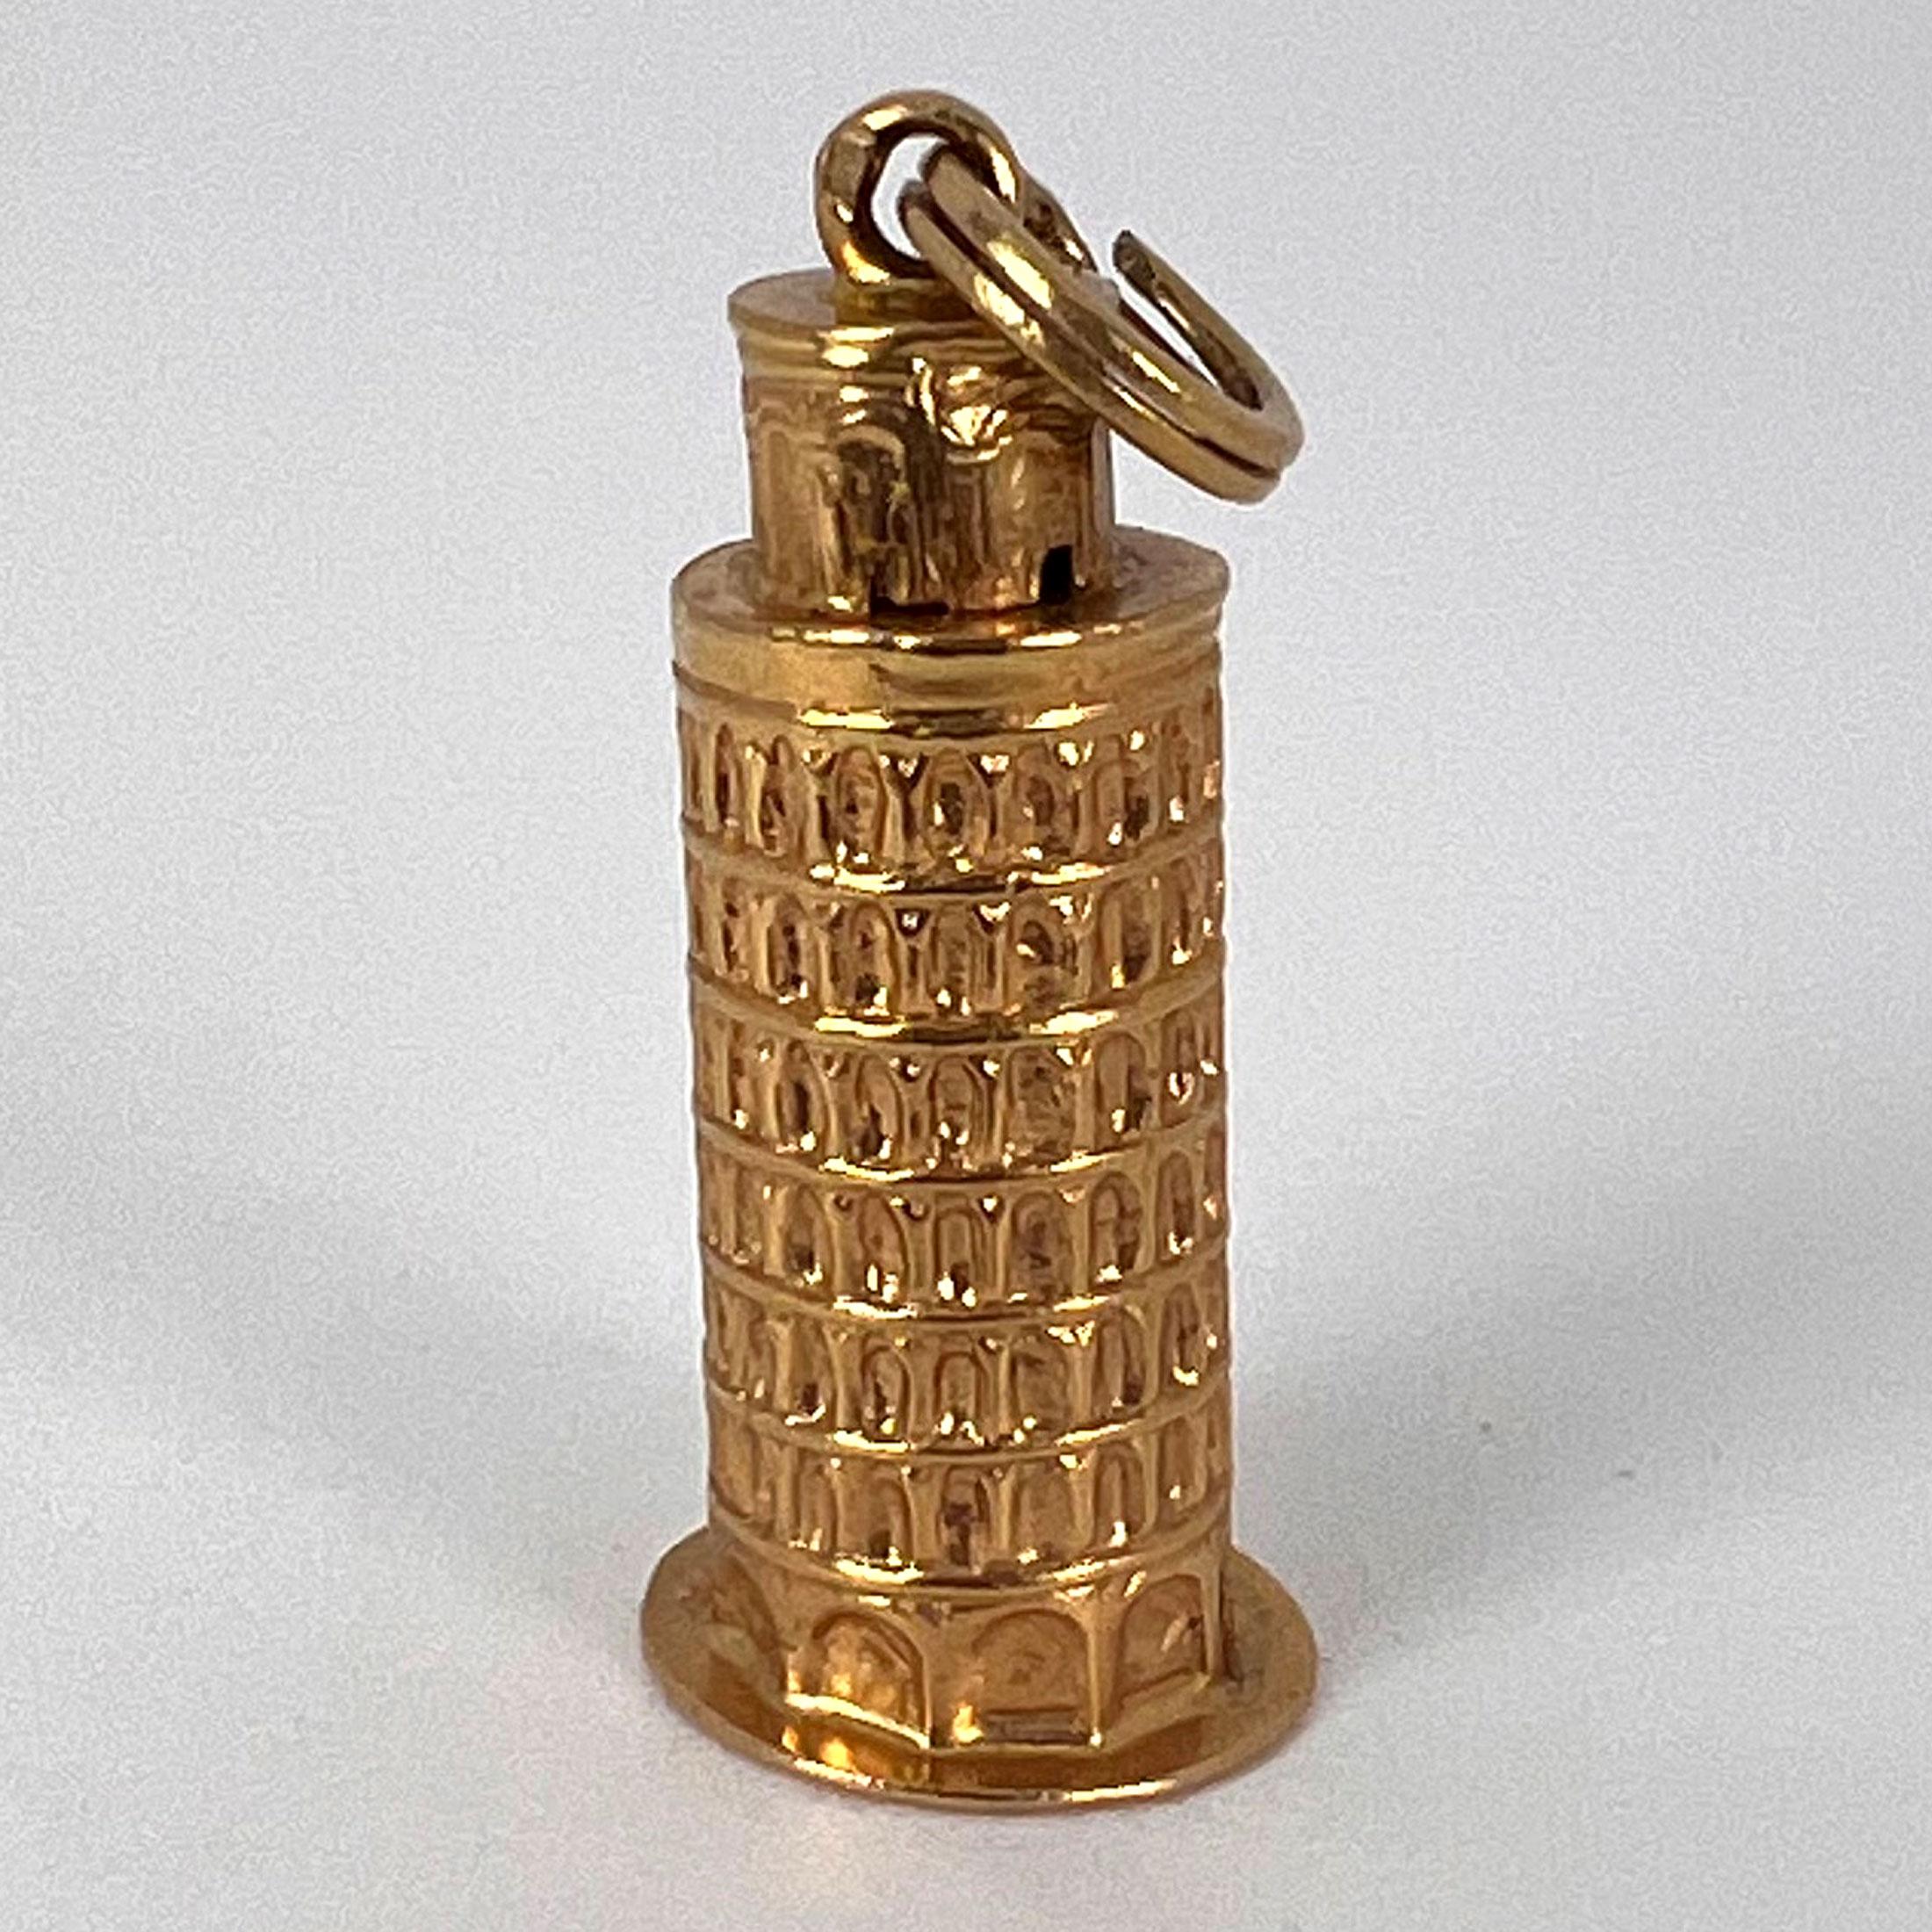 Italian Leaning Tower of Pisa 18K Yellow Gold Charm Pendant For Sale 8